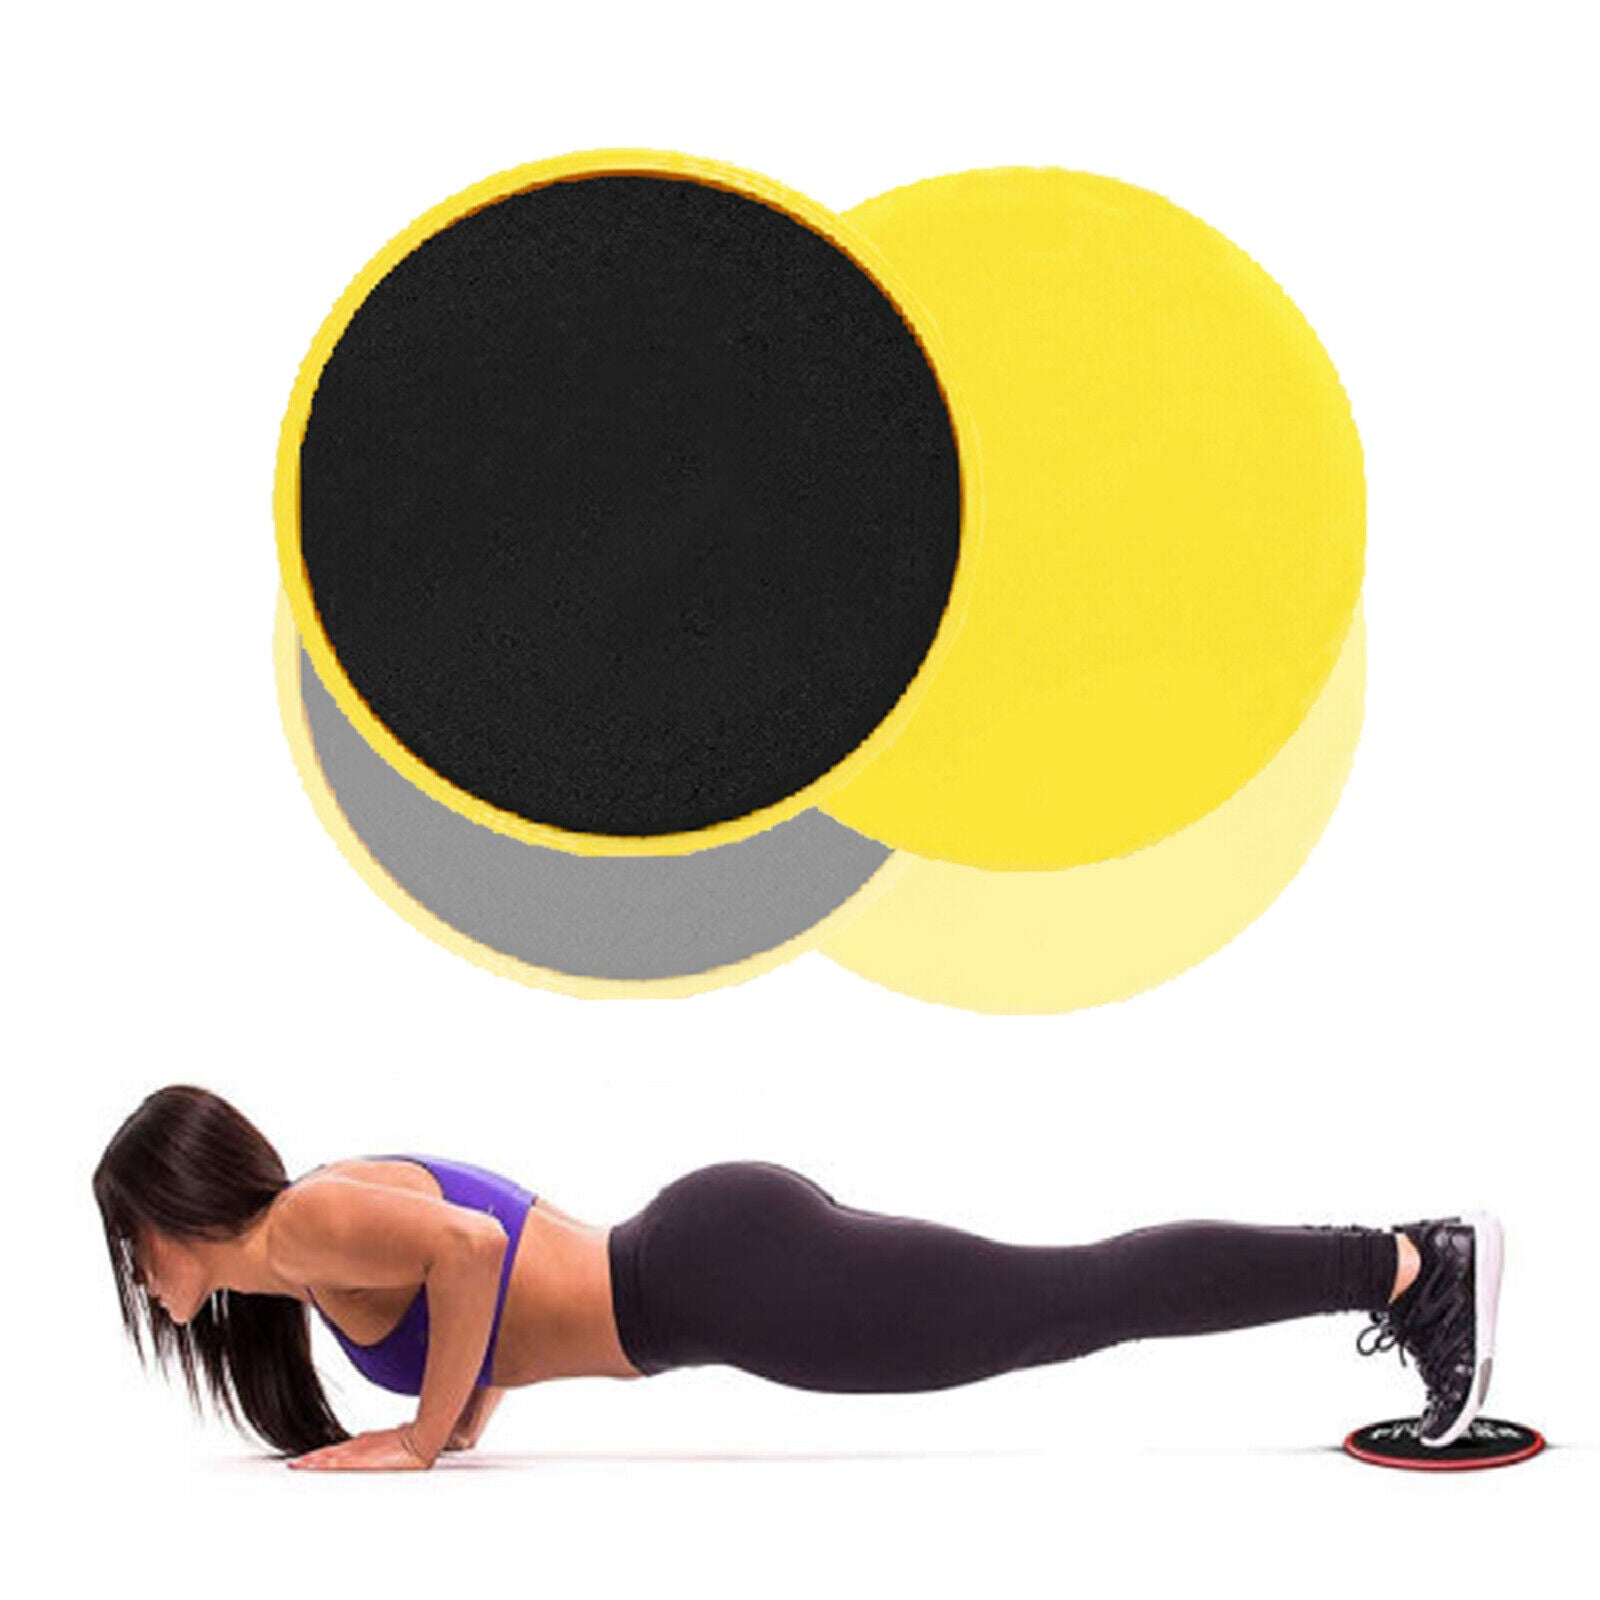 Sliders for Working Out 4 Exercise Sliders Core Exercise Sliders Dual Sided  Disks for Abdominal Exercise, Strengthen Core, Glutes, Abs, Fitness